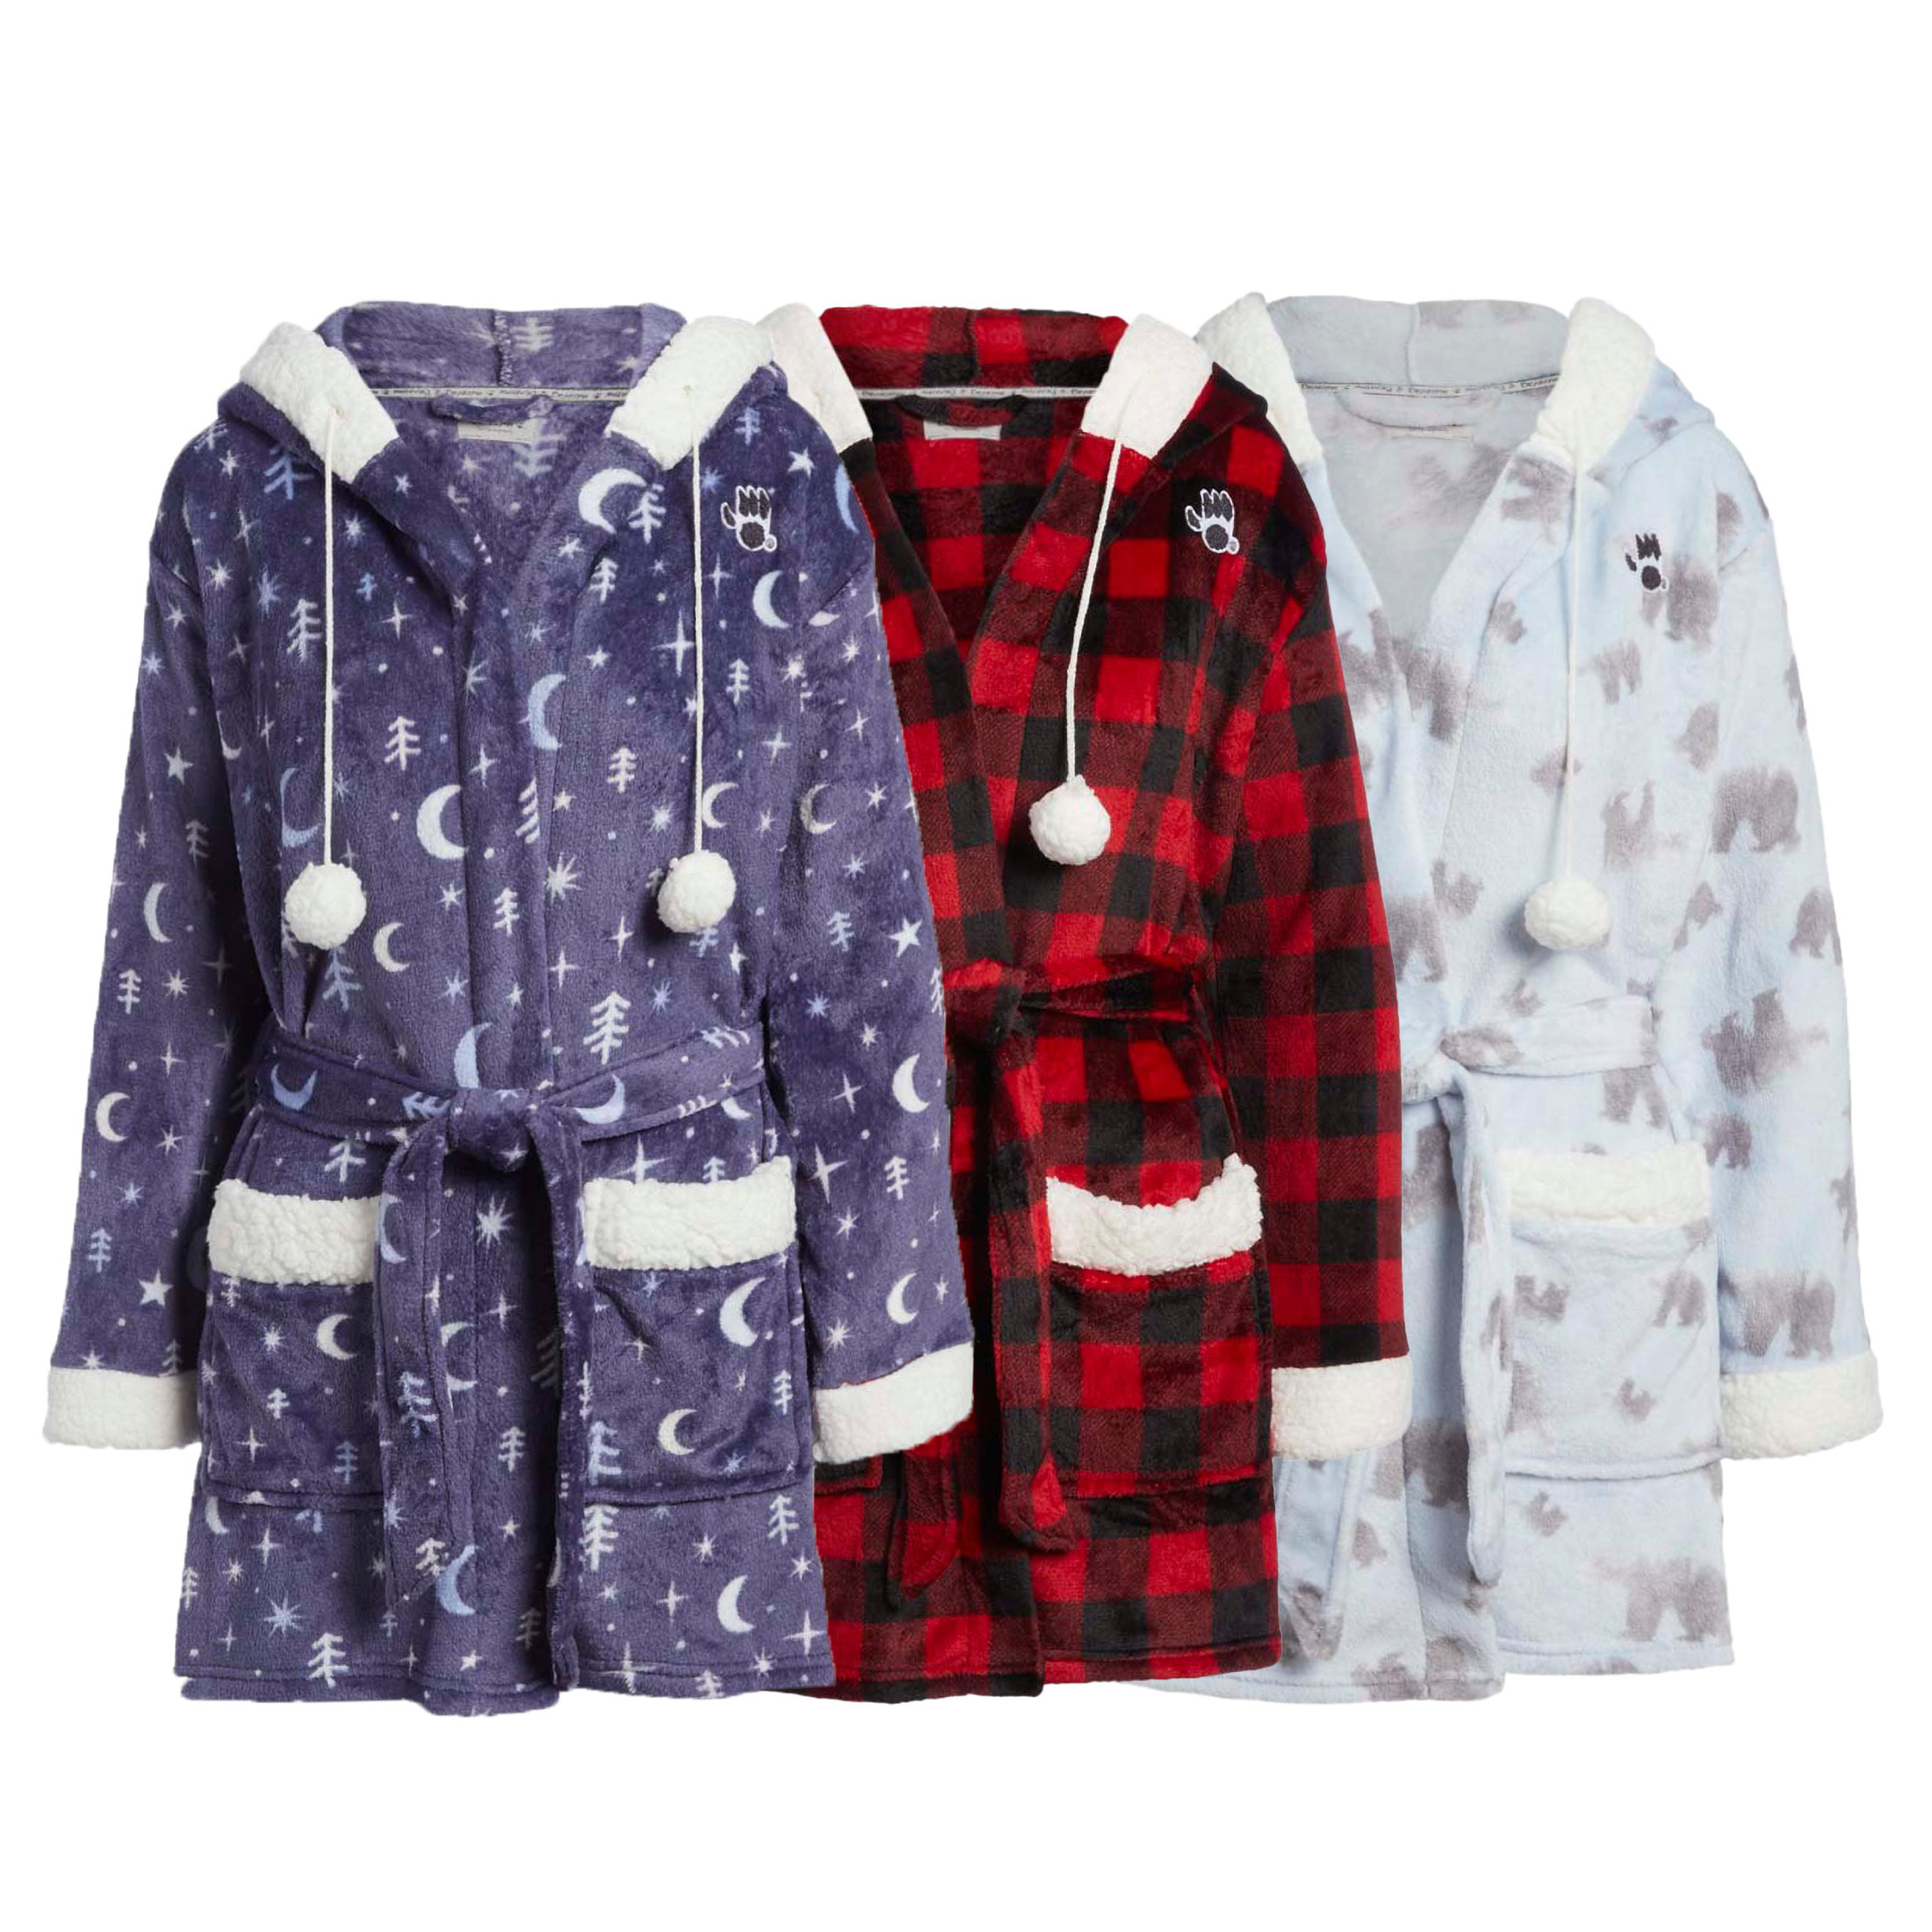 2-Pack: Women's Soft Plush Sherpa Lined Trim Print Robe With Pockets And Hood - Medium